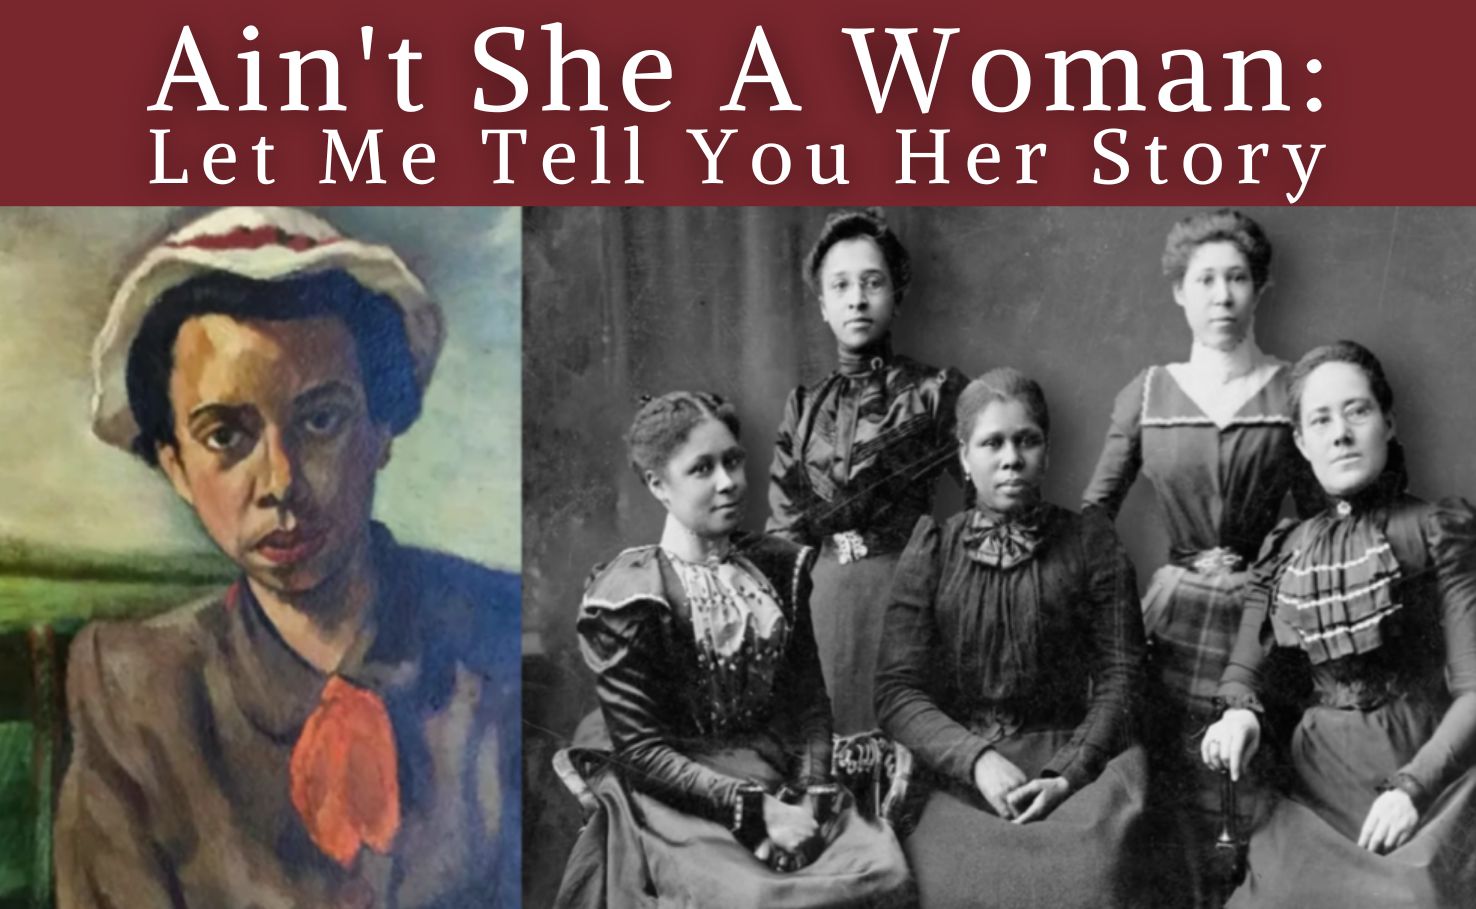 A color portrait of a Black woman next to a black-and-white photograph of 5 Black women